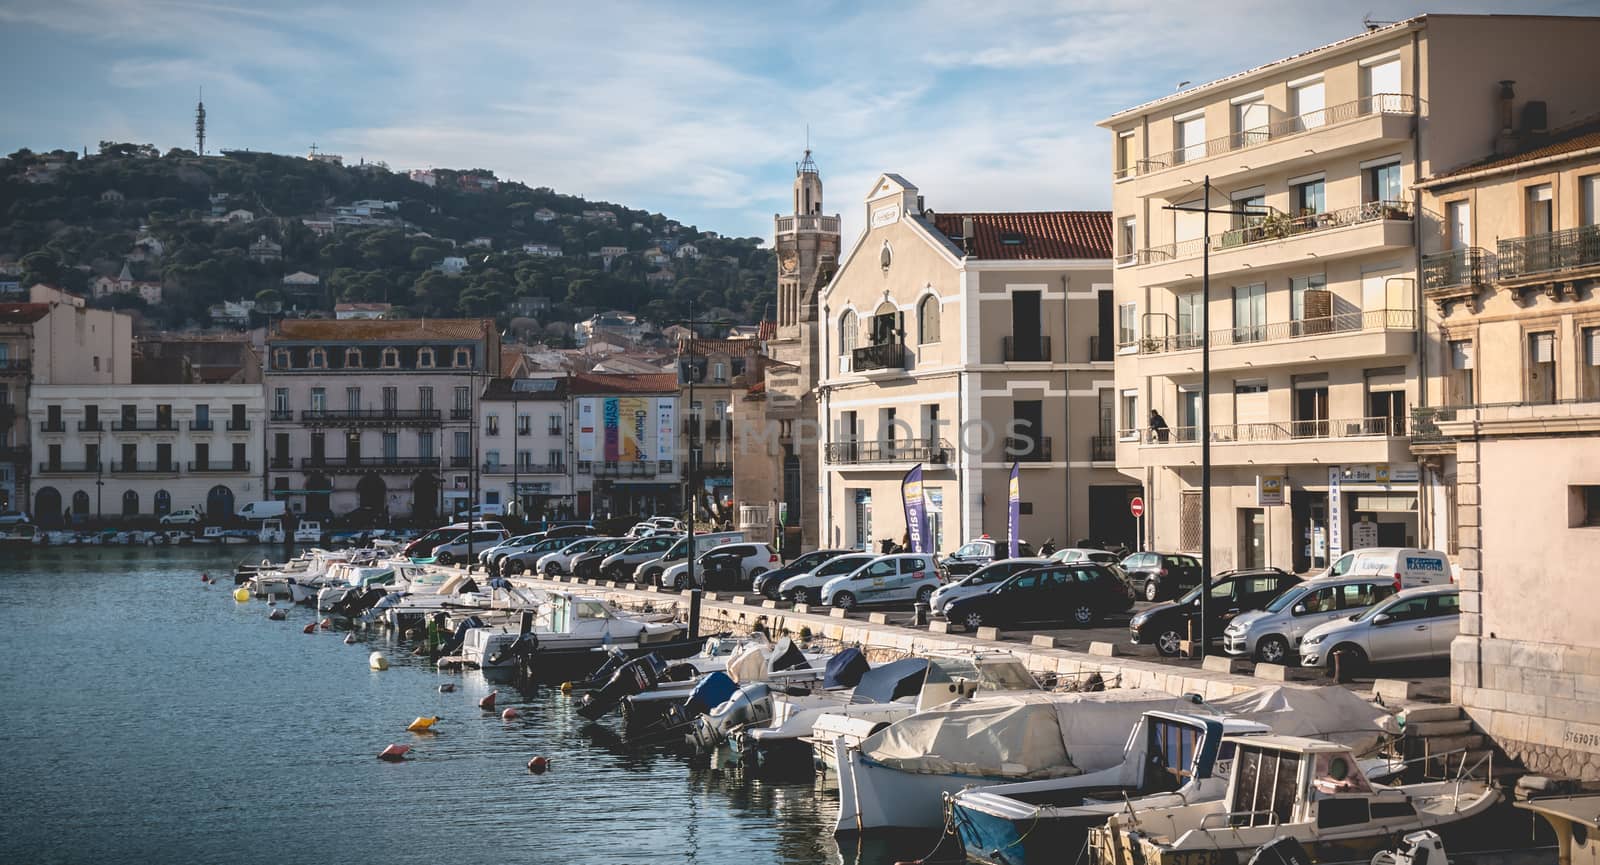 view of the marina in the city center of Sete, France by AtlanticEUROSTOXX